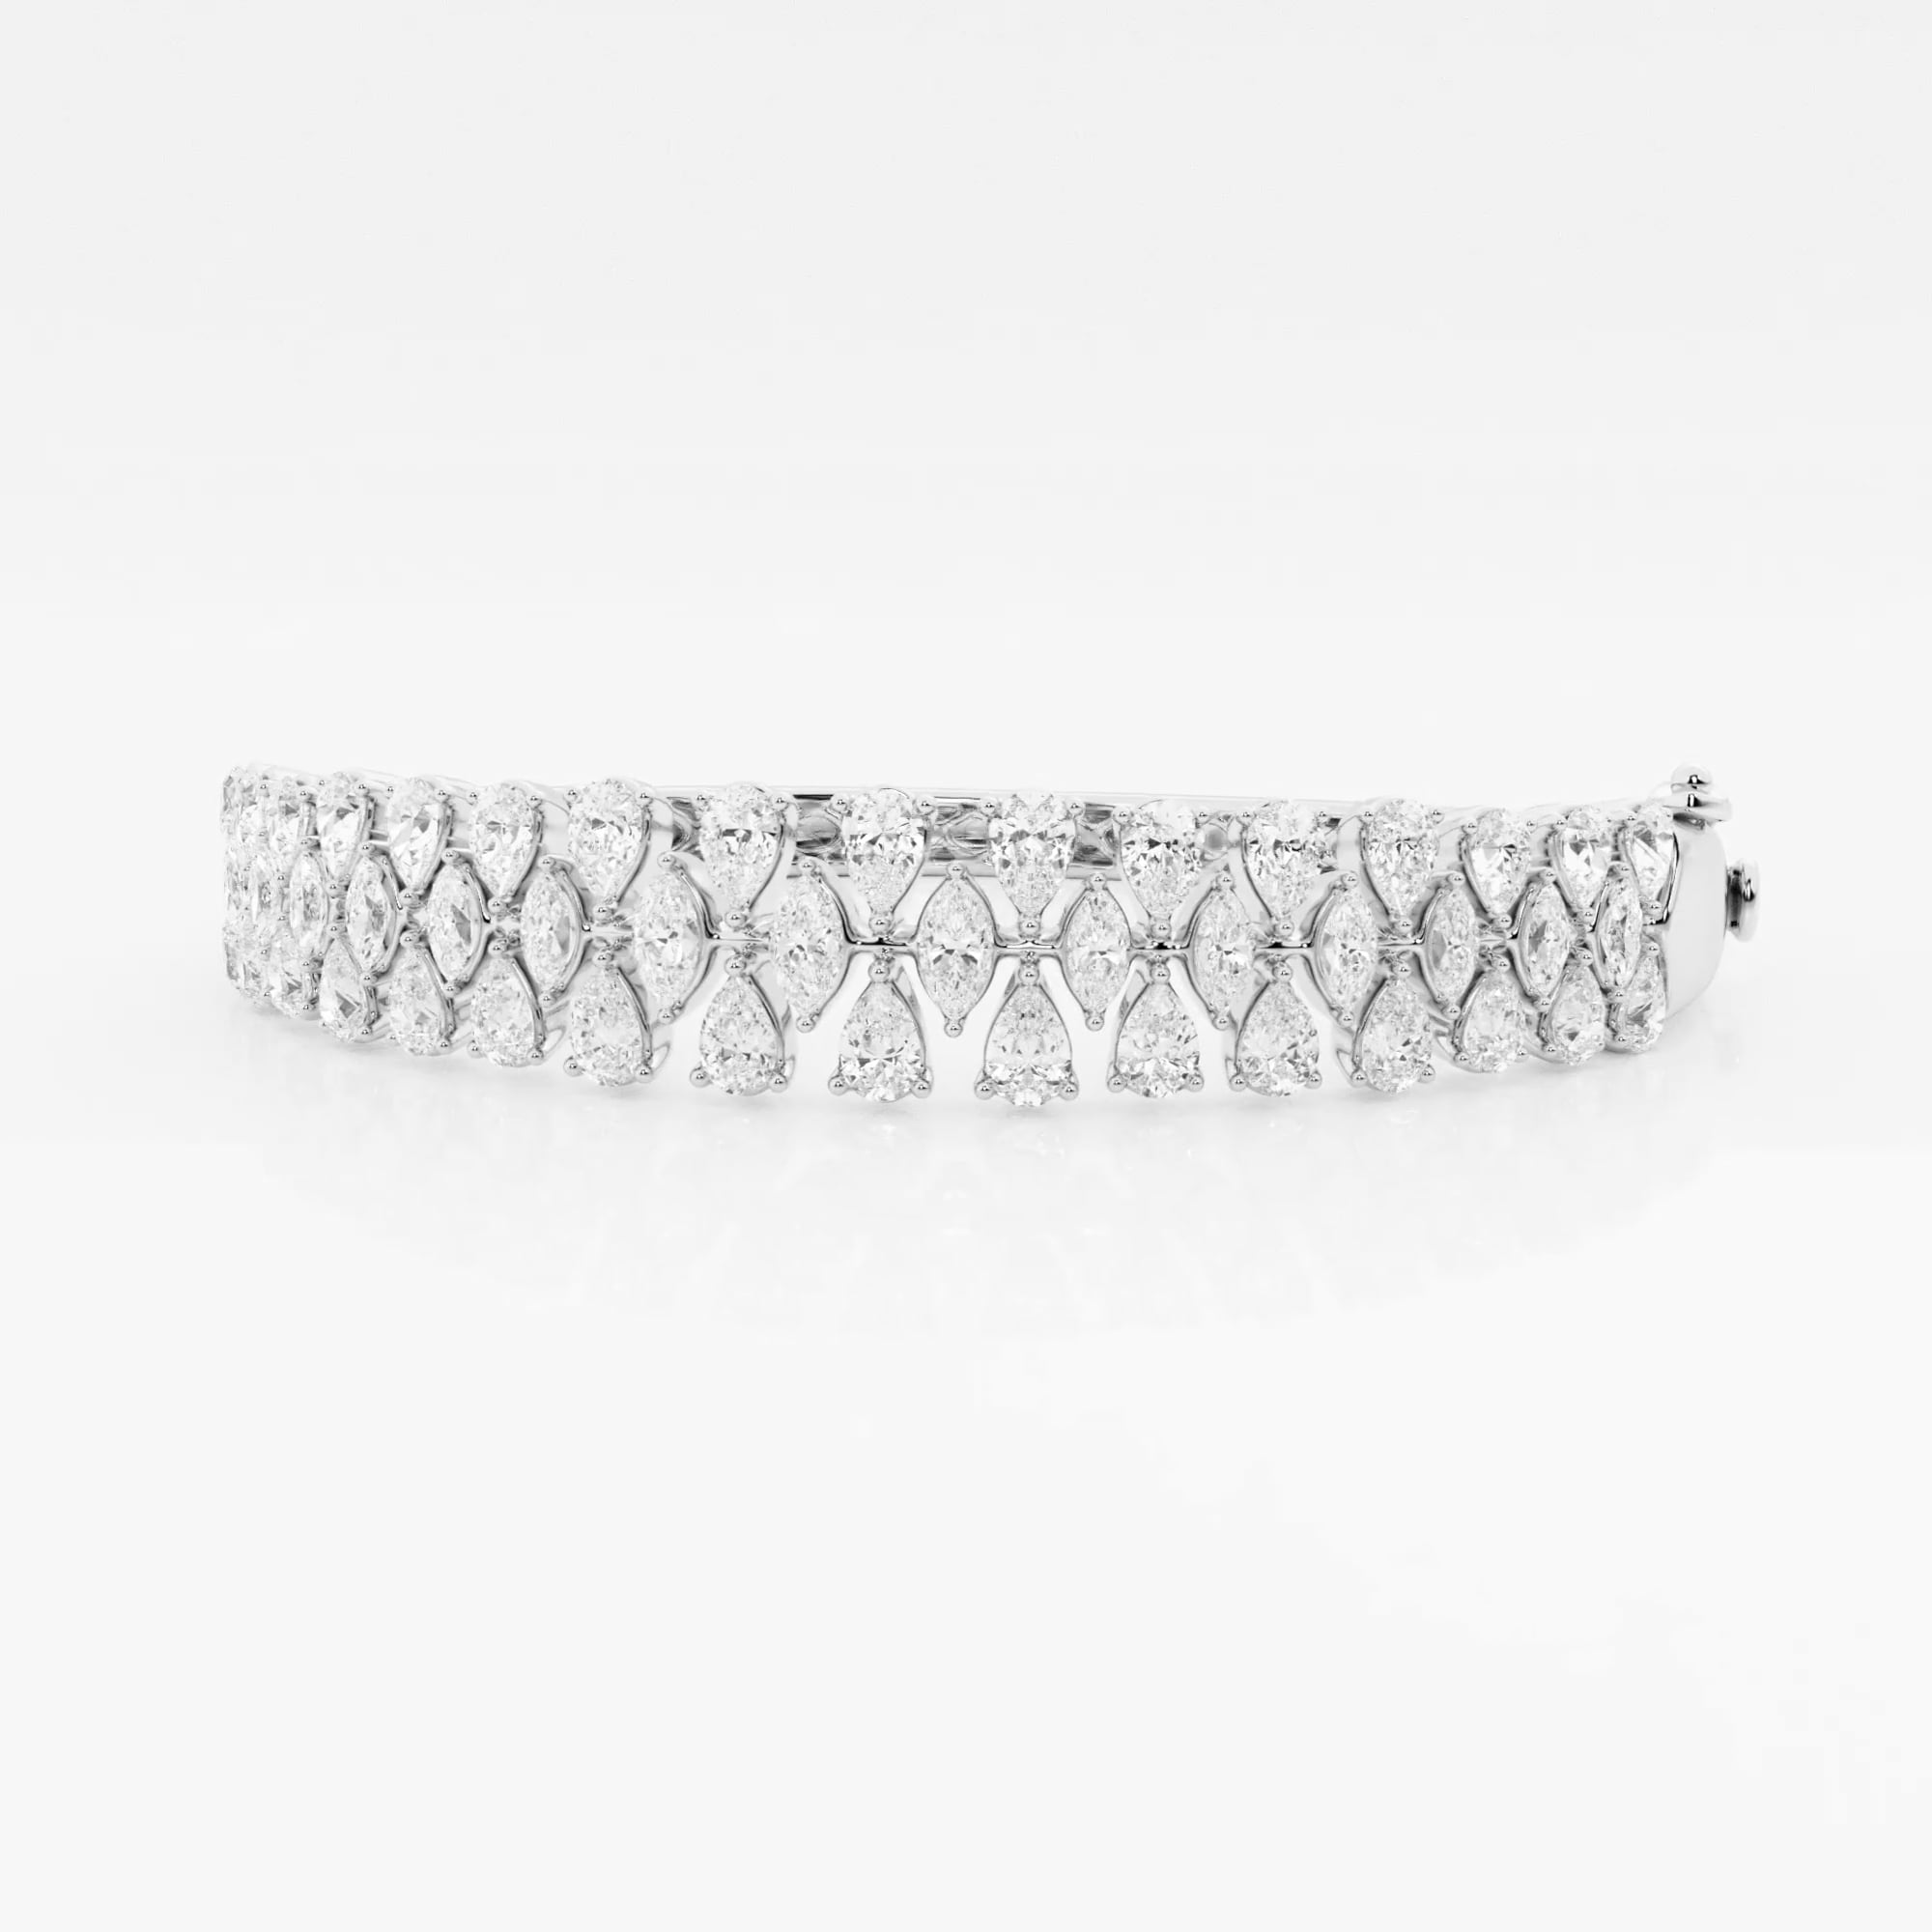 product video for Badgley Mischka 5 3/4 ctw Marquise and Pear Lab Grown Diamond Bangle Bracelet Platinum 7 Inches